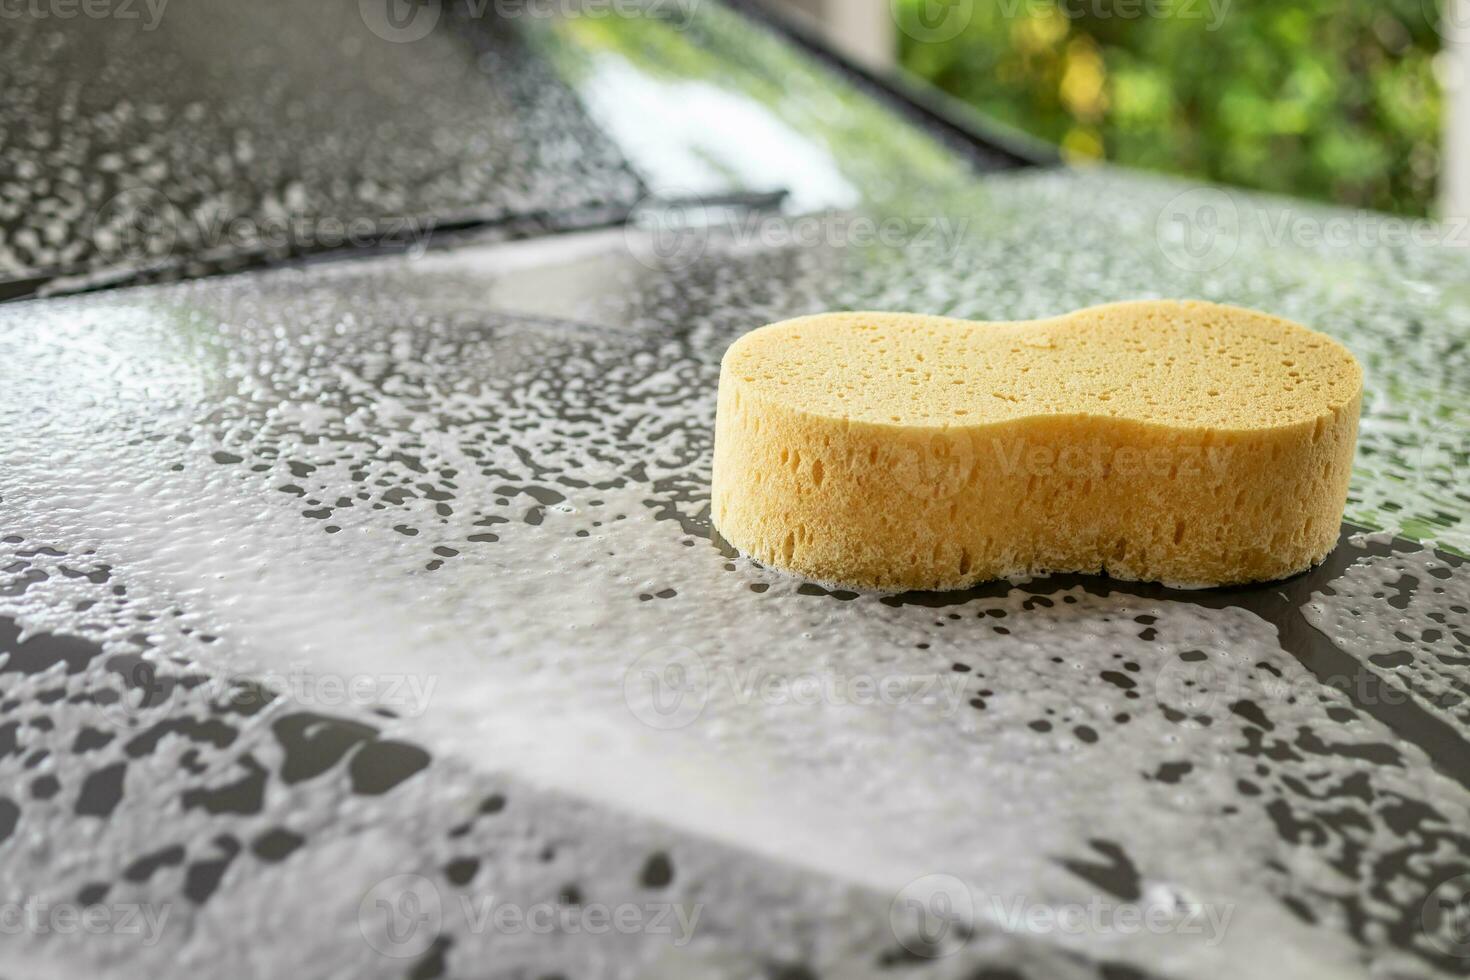 car cleaning and washing with yellow sponge and foam soap photo